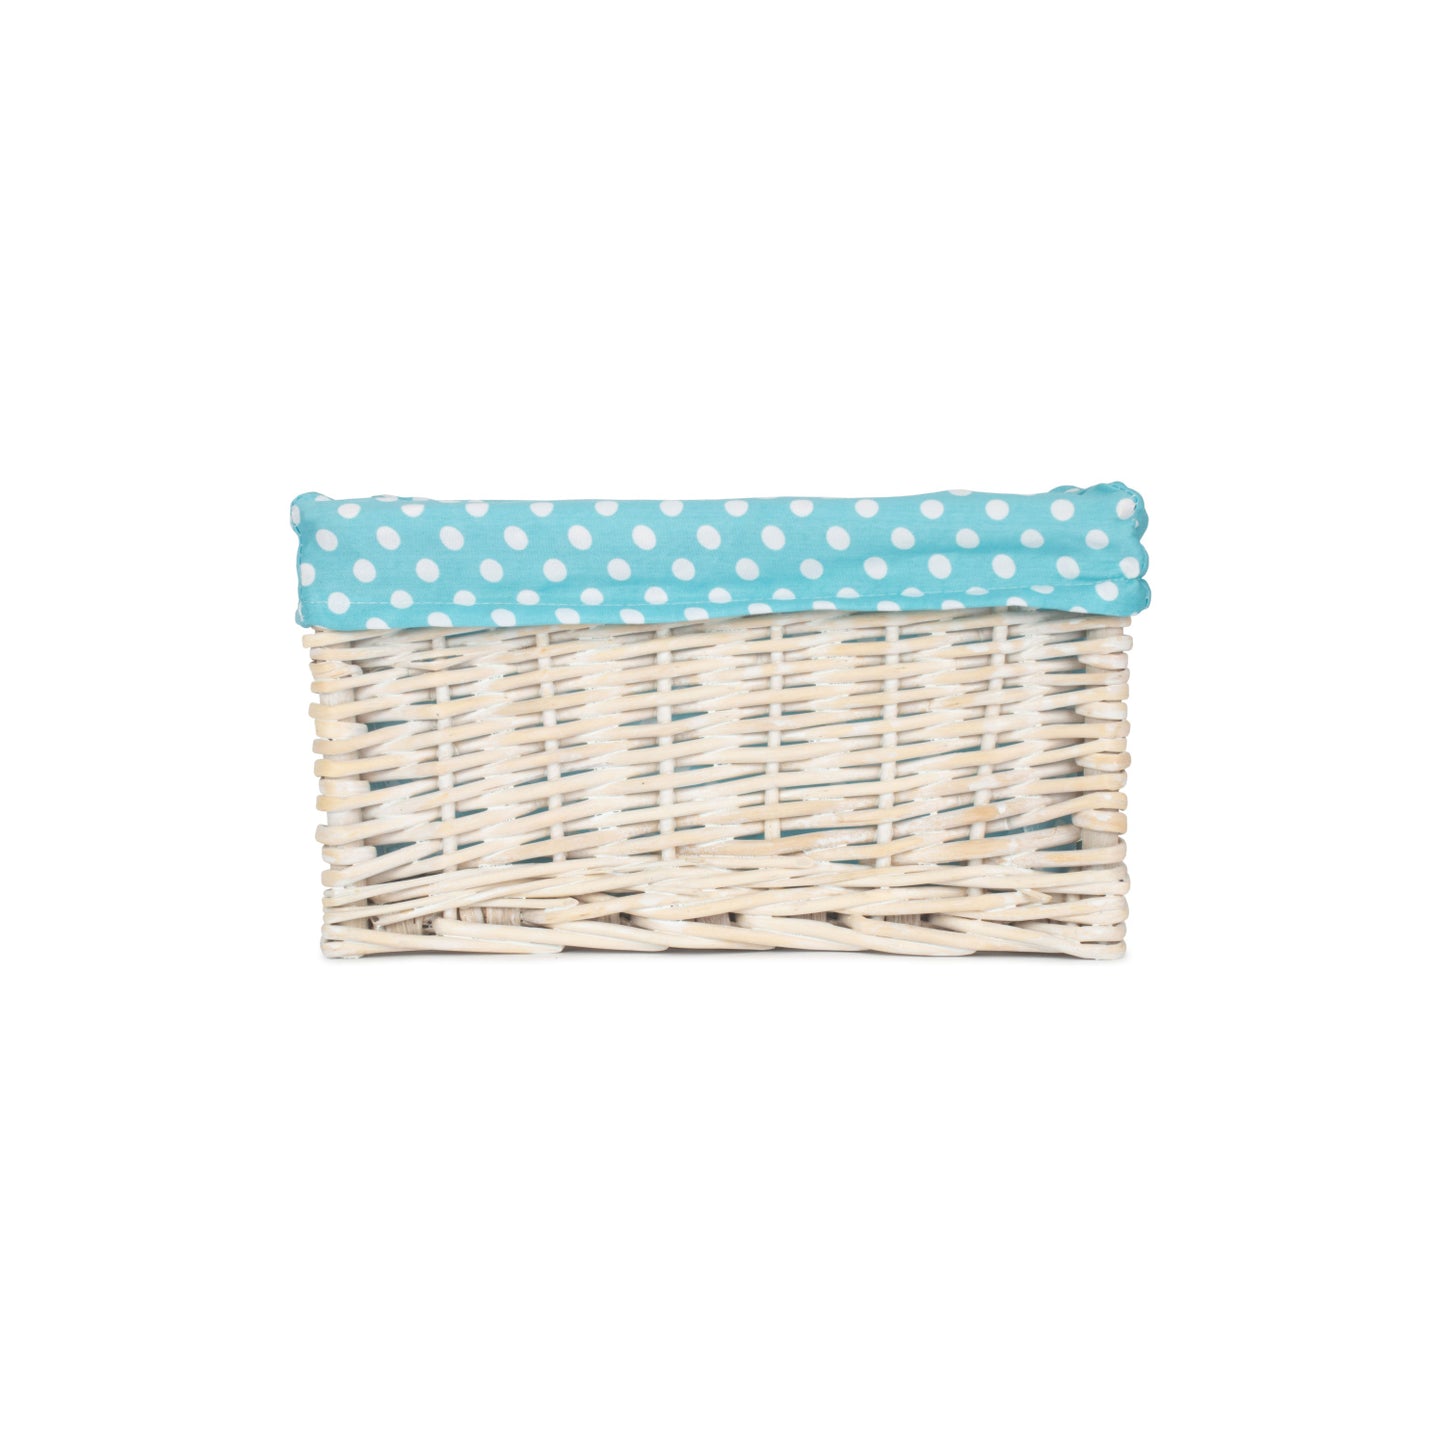 Small White Wash Storage Basket With Blue Spotty Lining